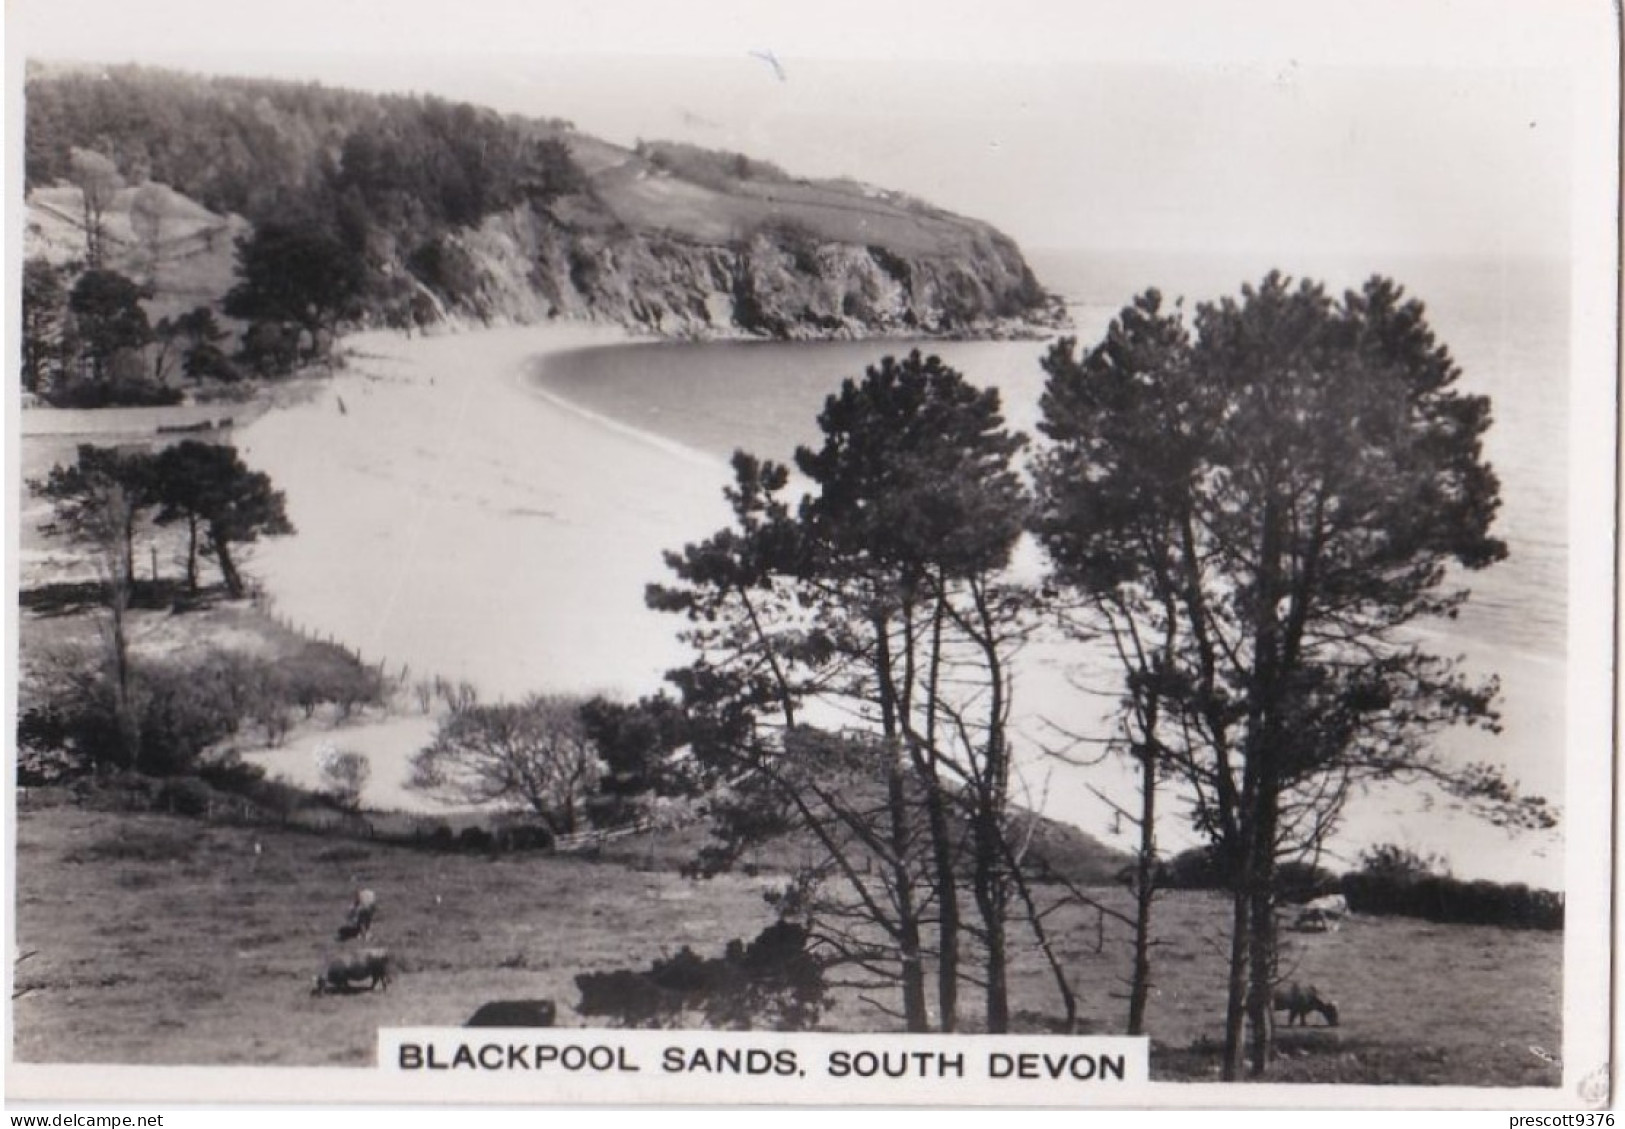 Holiday Haunts By The Sea 1938 - Senior Service Photo Card - M Size - RP - 32 Blackpool Sands, S. Devon - Wills